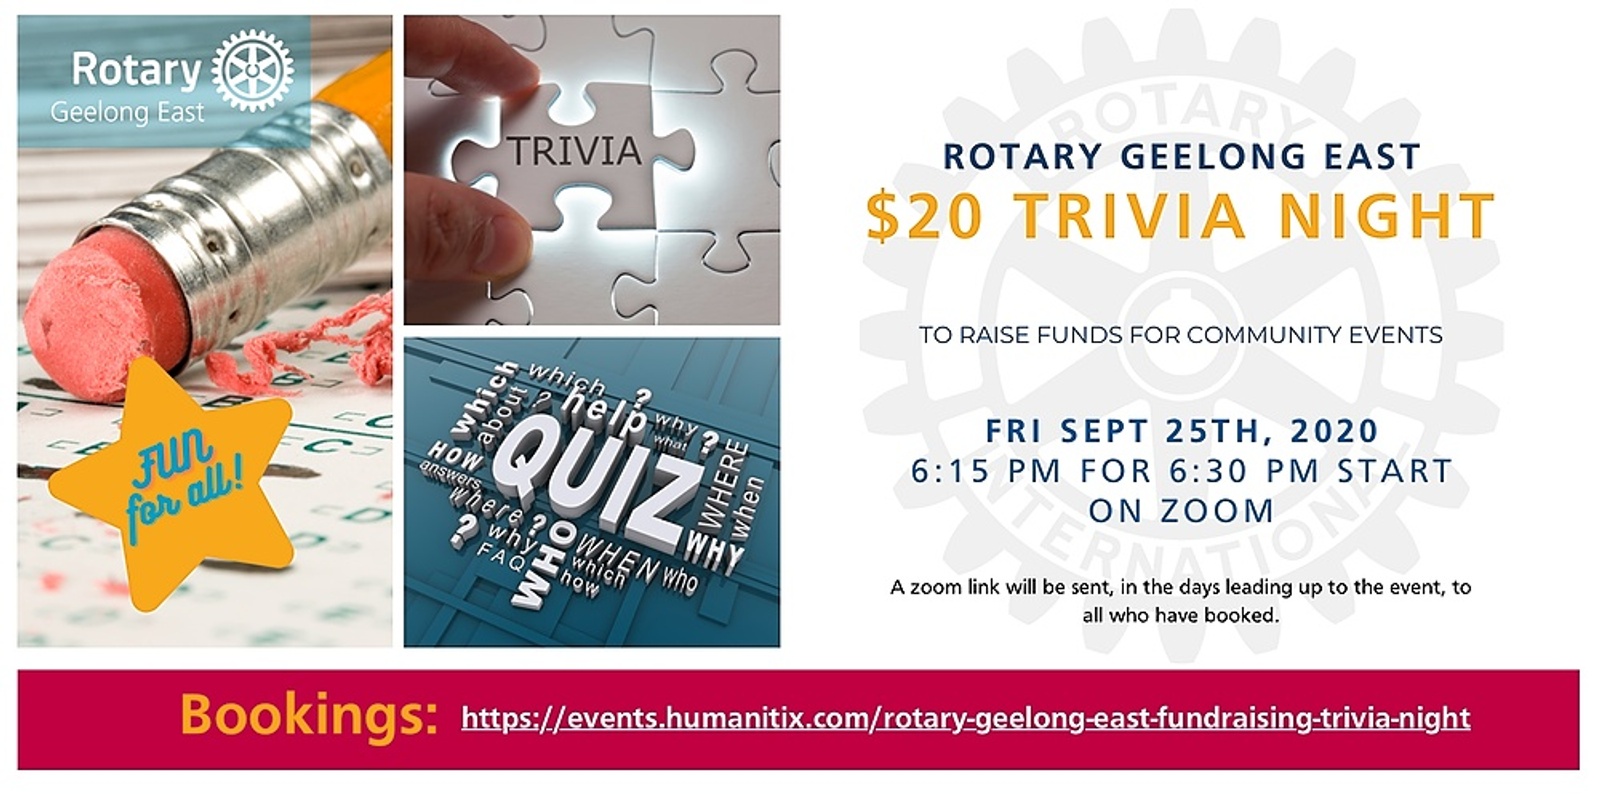 Banner image for Rotary Geelong East - Fundraising Trivia Night